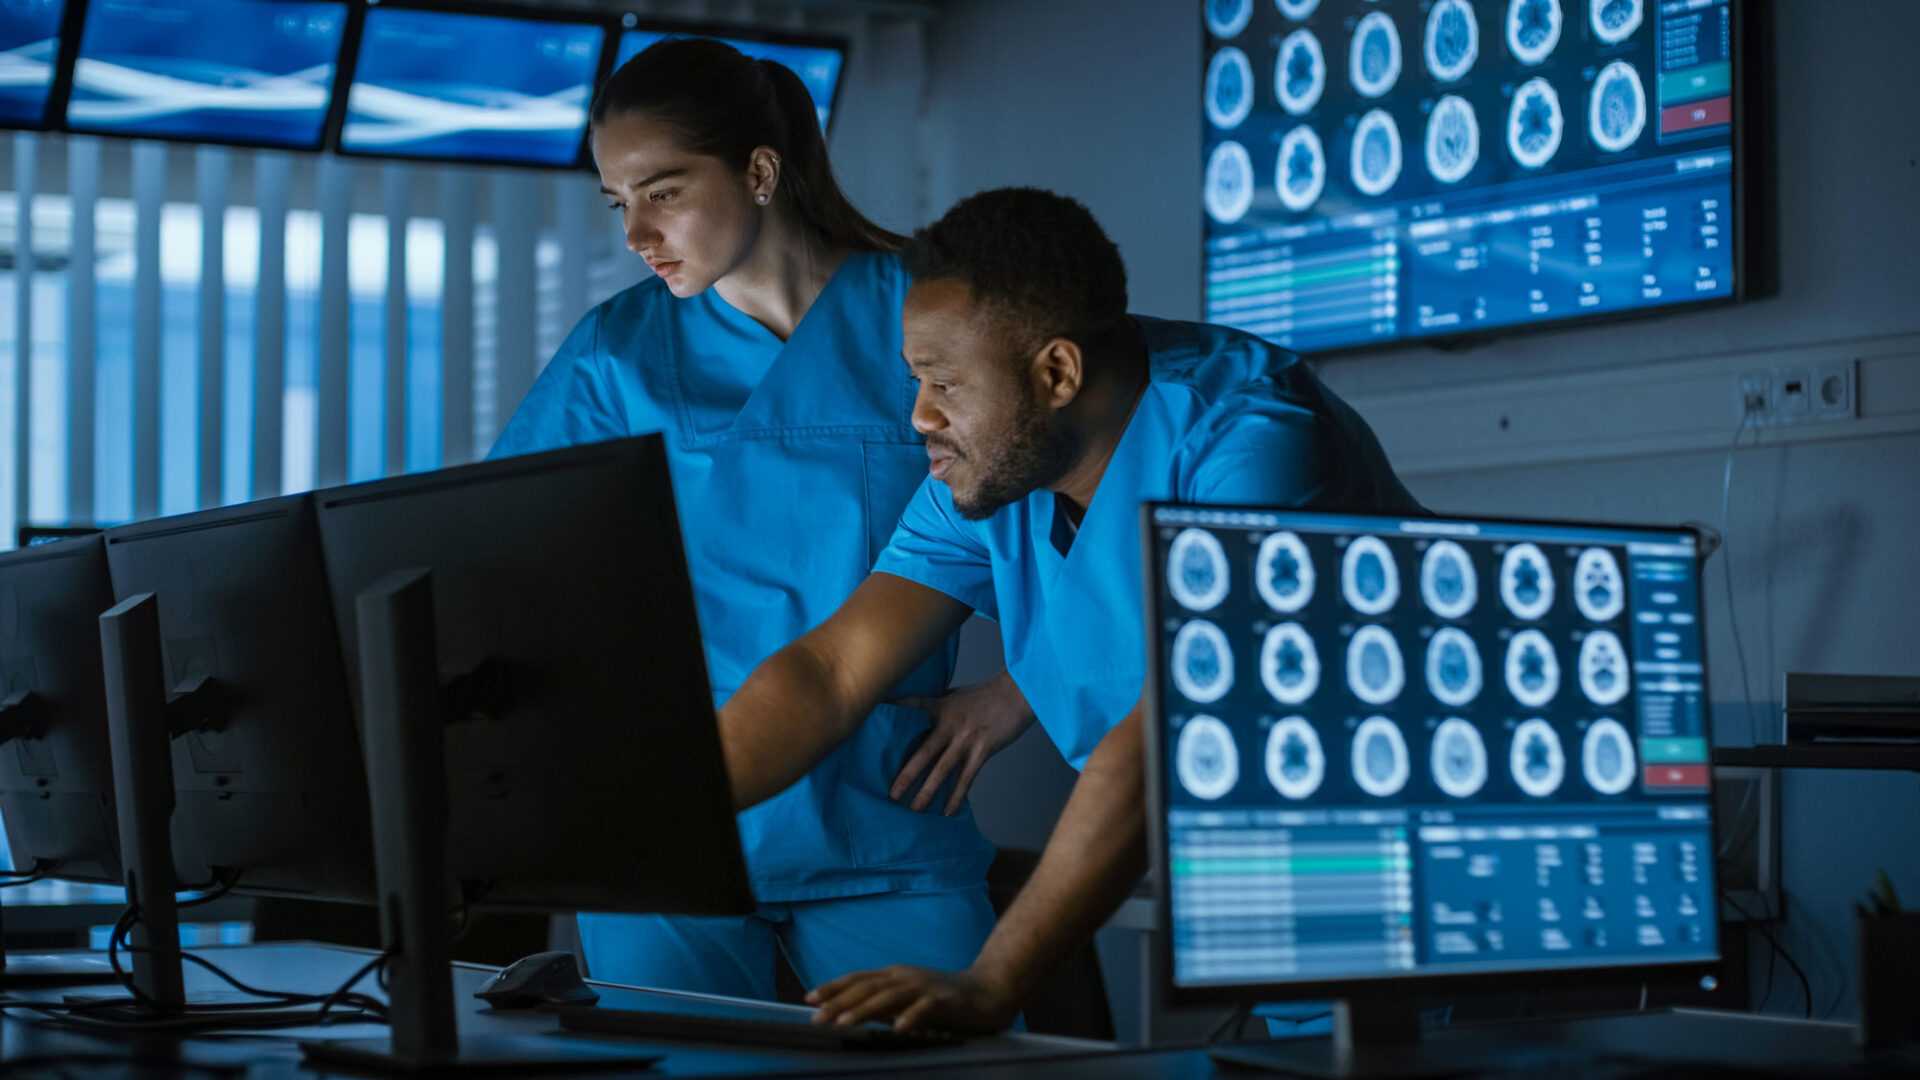 Two doctors facilitating and monitoring an MRI from a control room in a hospital